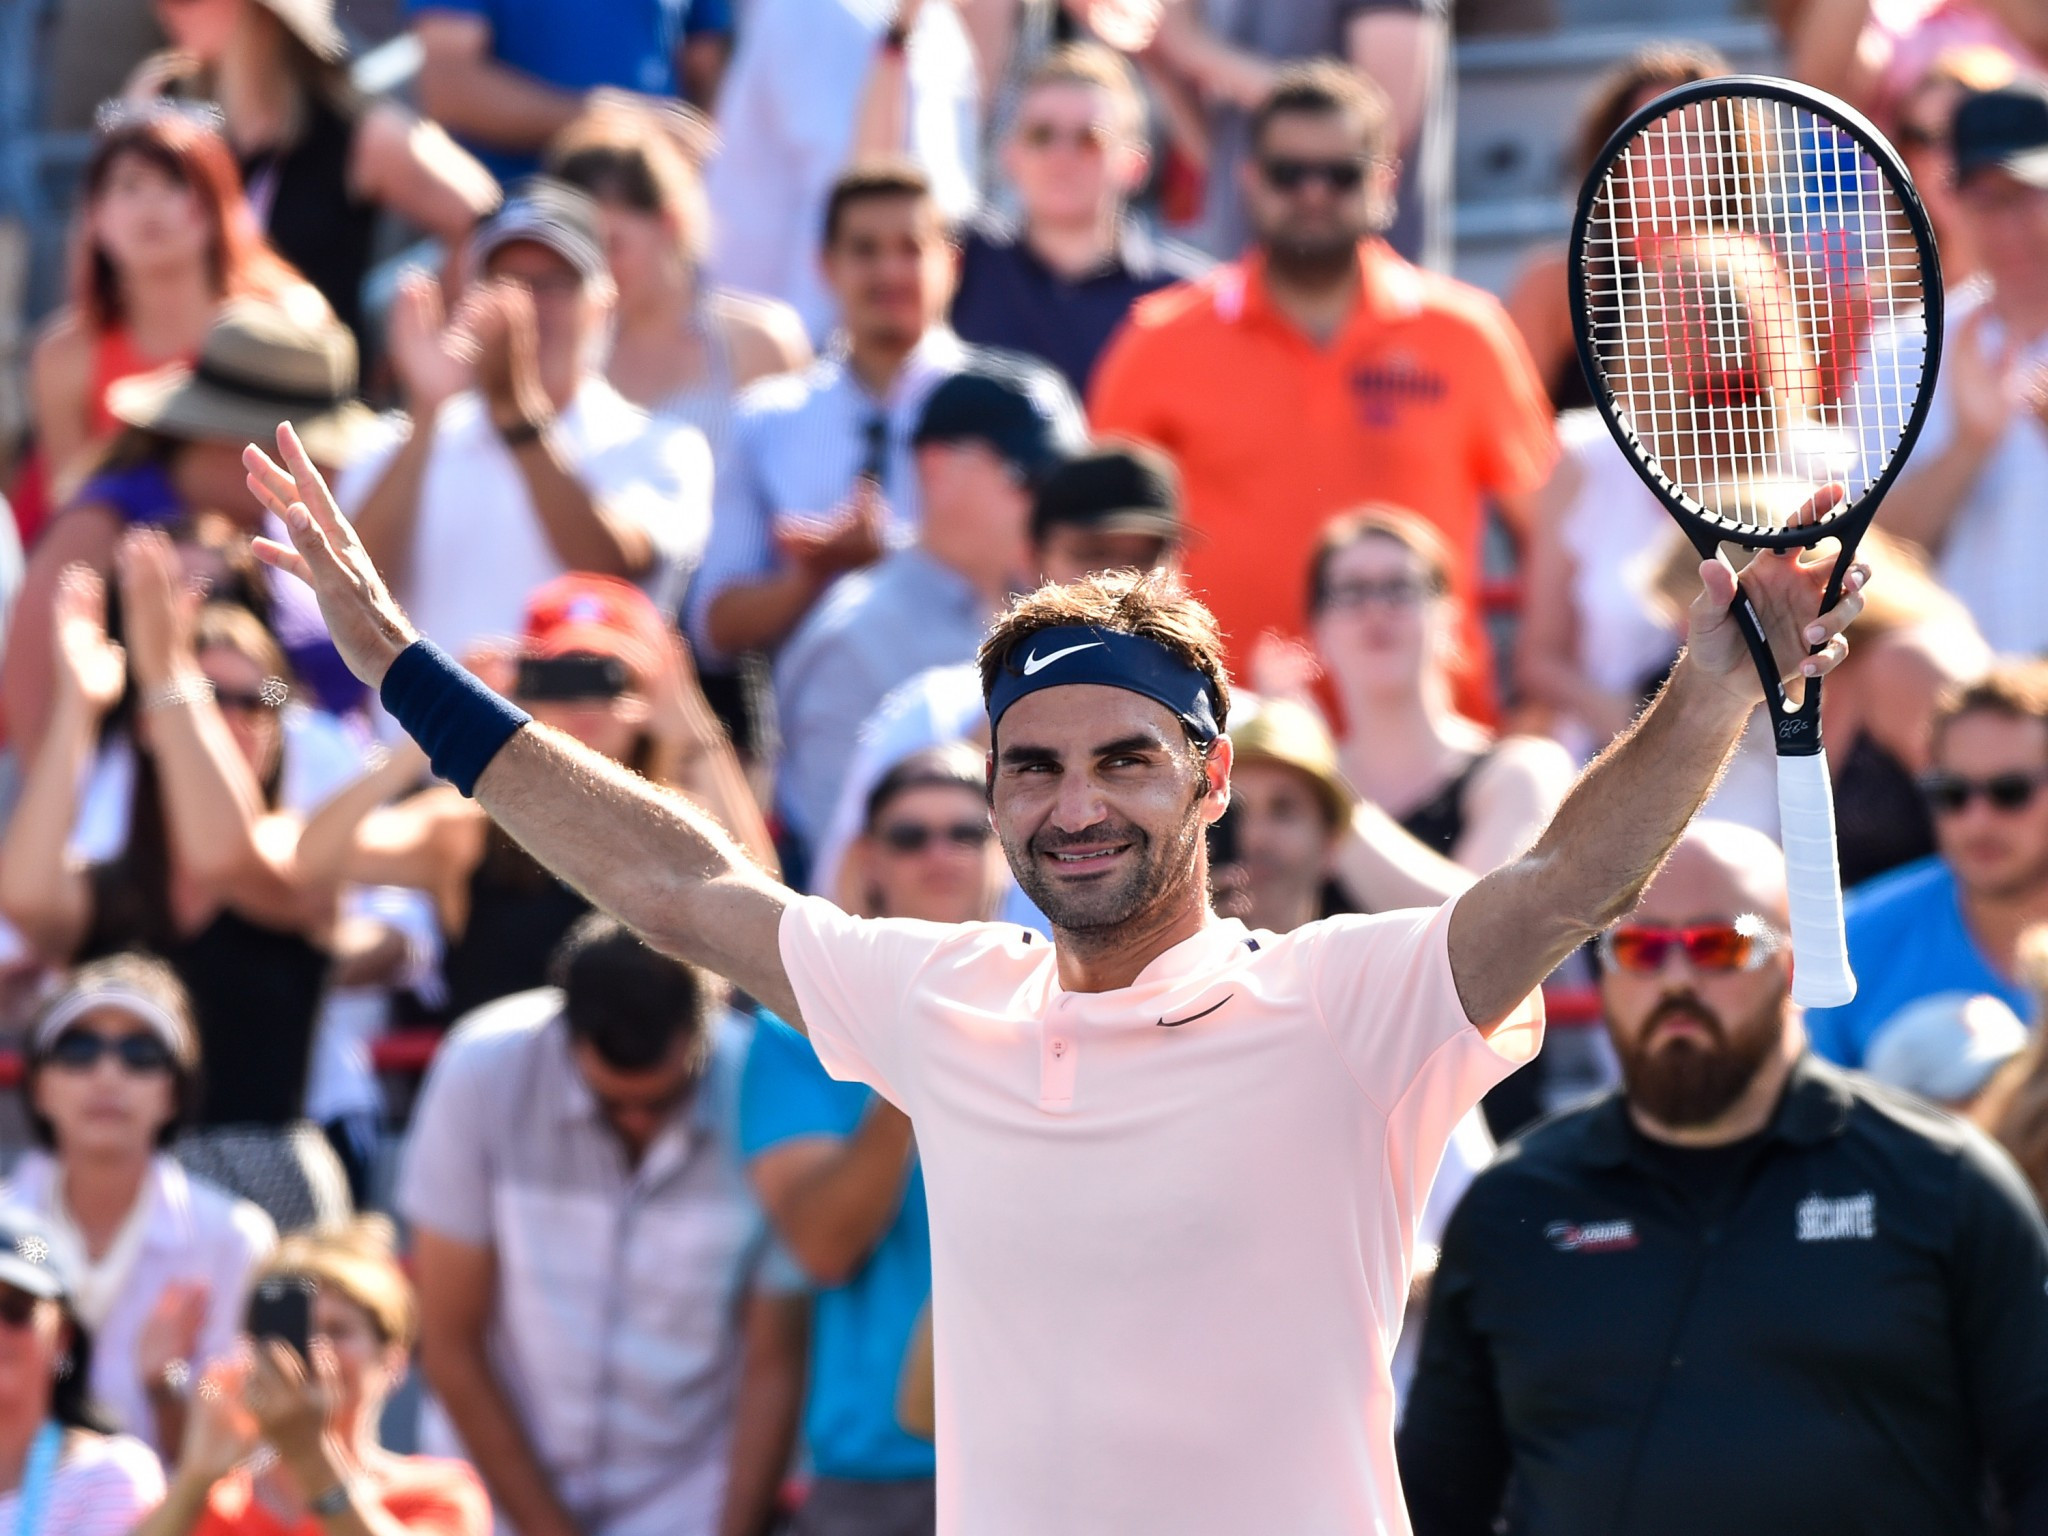 Federer closes in on sixth tournament win of the season in Montreal